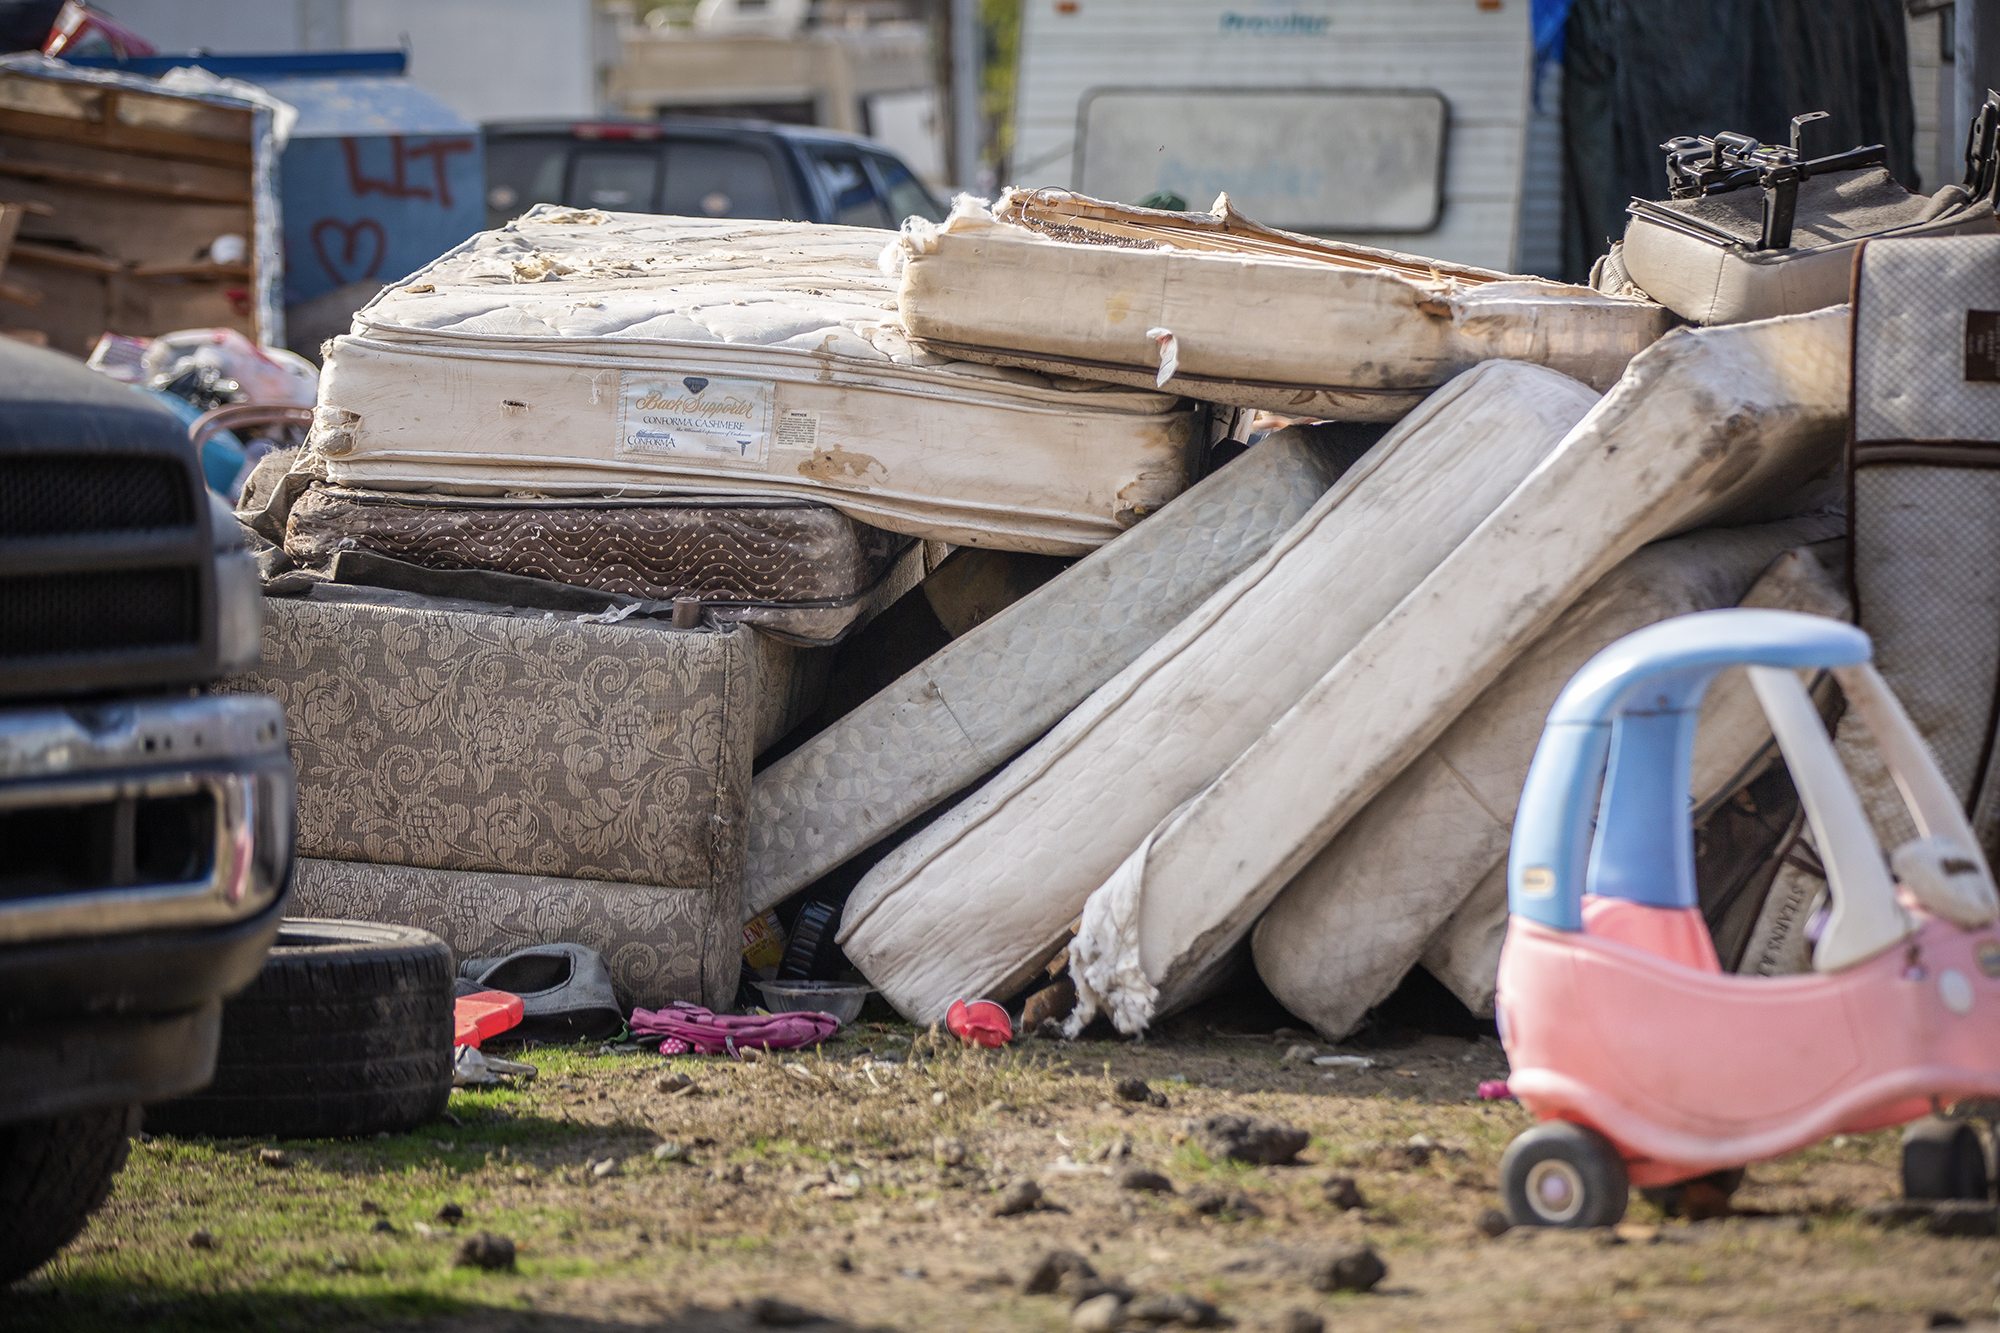 Mattresses lay on top of each other in a makeshift playground at Stockton Park Village in Stockton on Nov. 22, 2022. Bob Riley, 87, lives in the area where he states that the owner let the park go and garbage hasn't been picked up for months. Photo by Rahul Lal, CalMatters